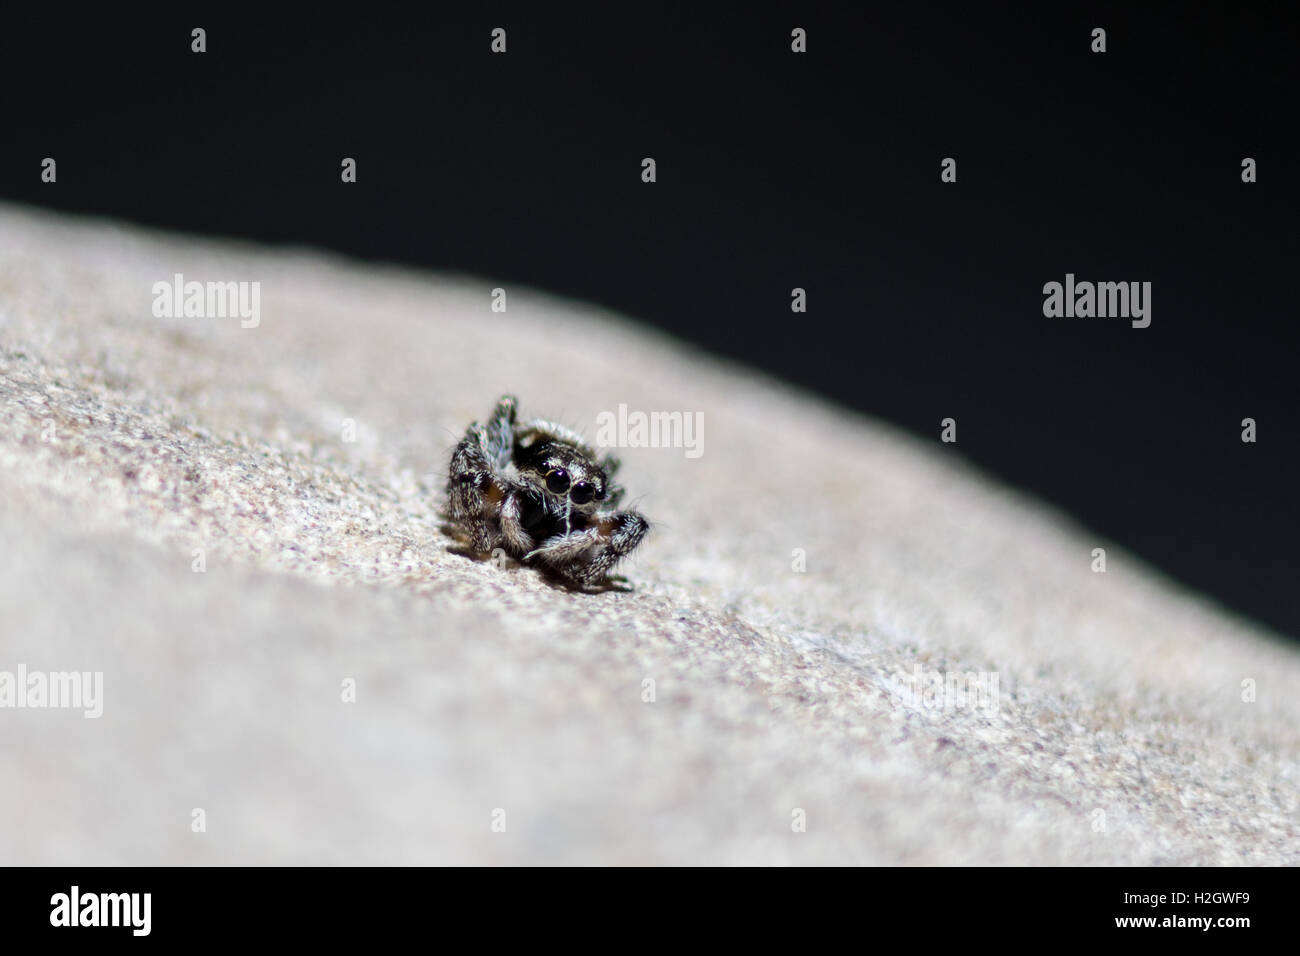 A small spider sat on a rock Stock Photo